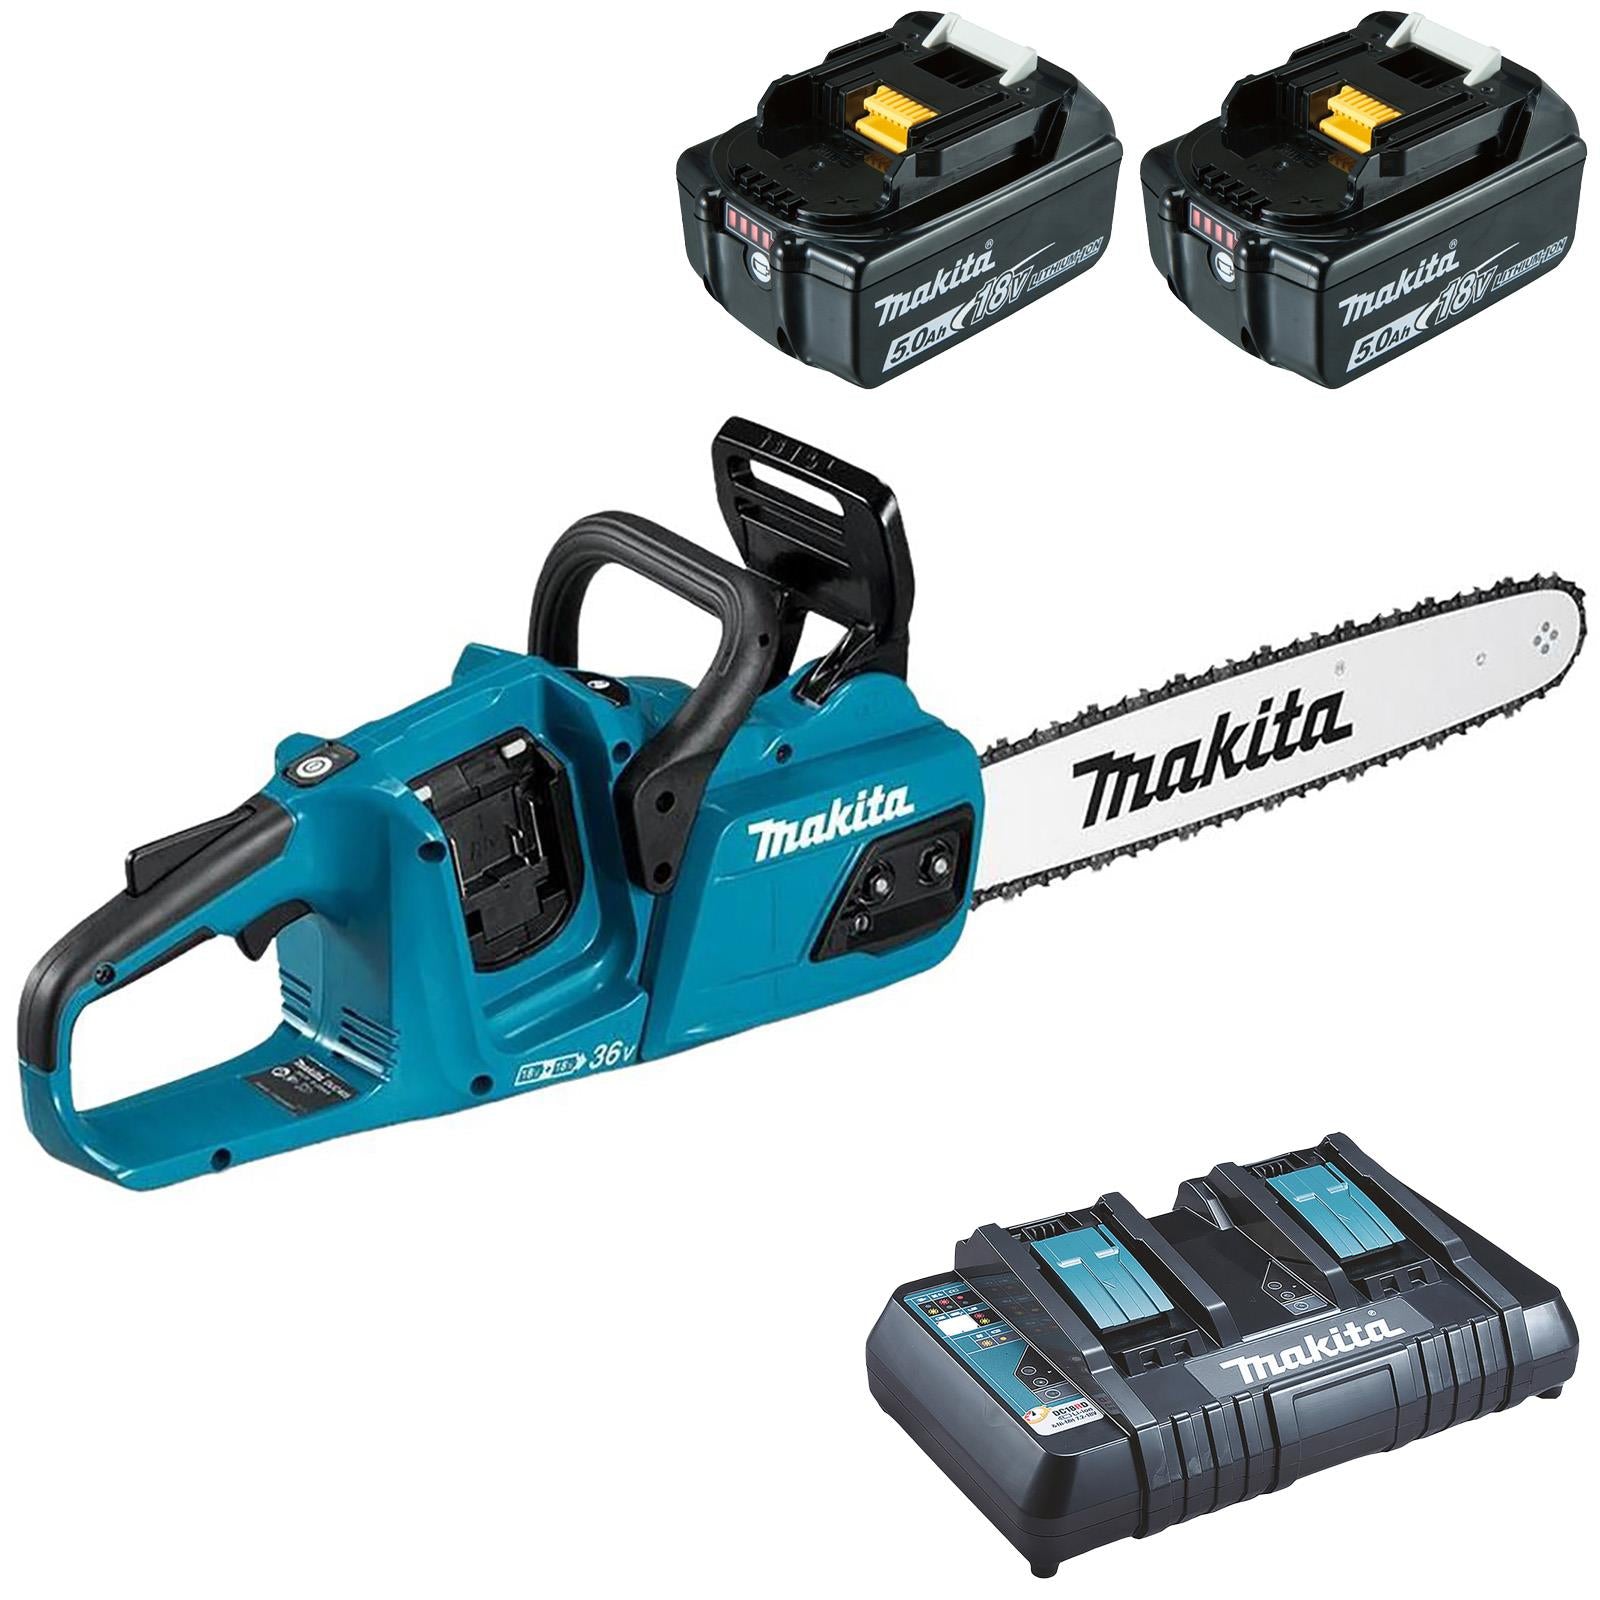 Makita Chainsaw Kit 30cm 12" 18V x 2 LXT Brushless Cordless 2 x 5Ah Battery and Dual Rapid Charger Garden Tree Cutting Pruning DUC305PT2